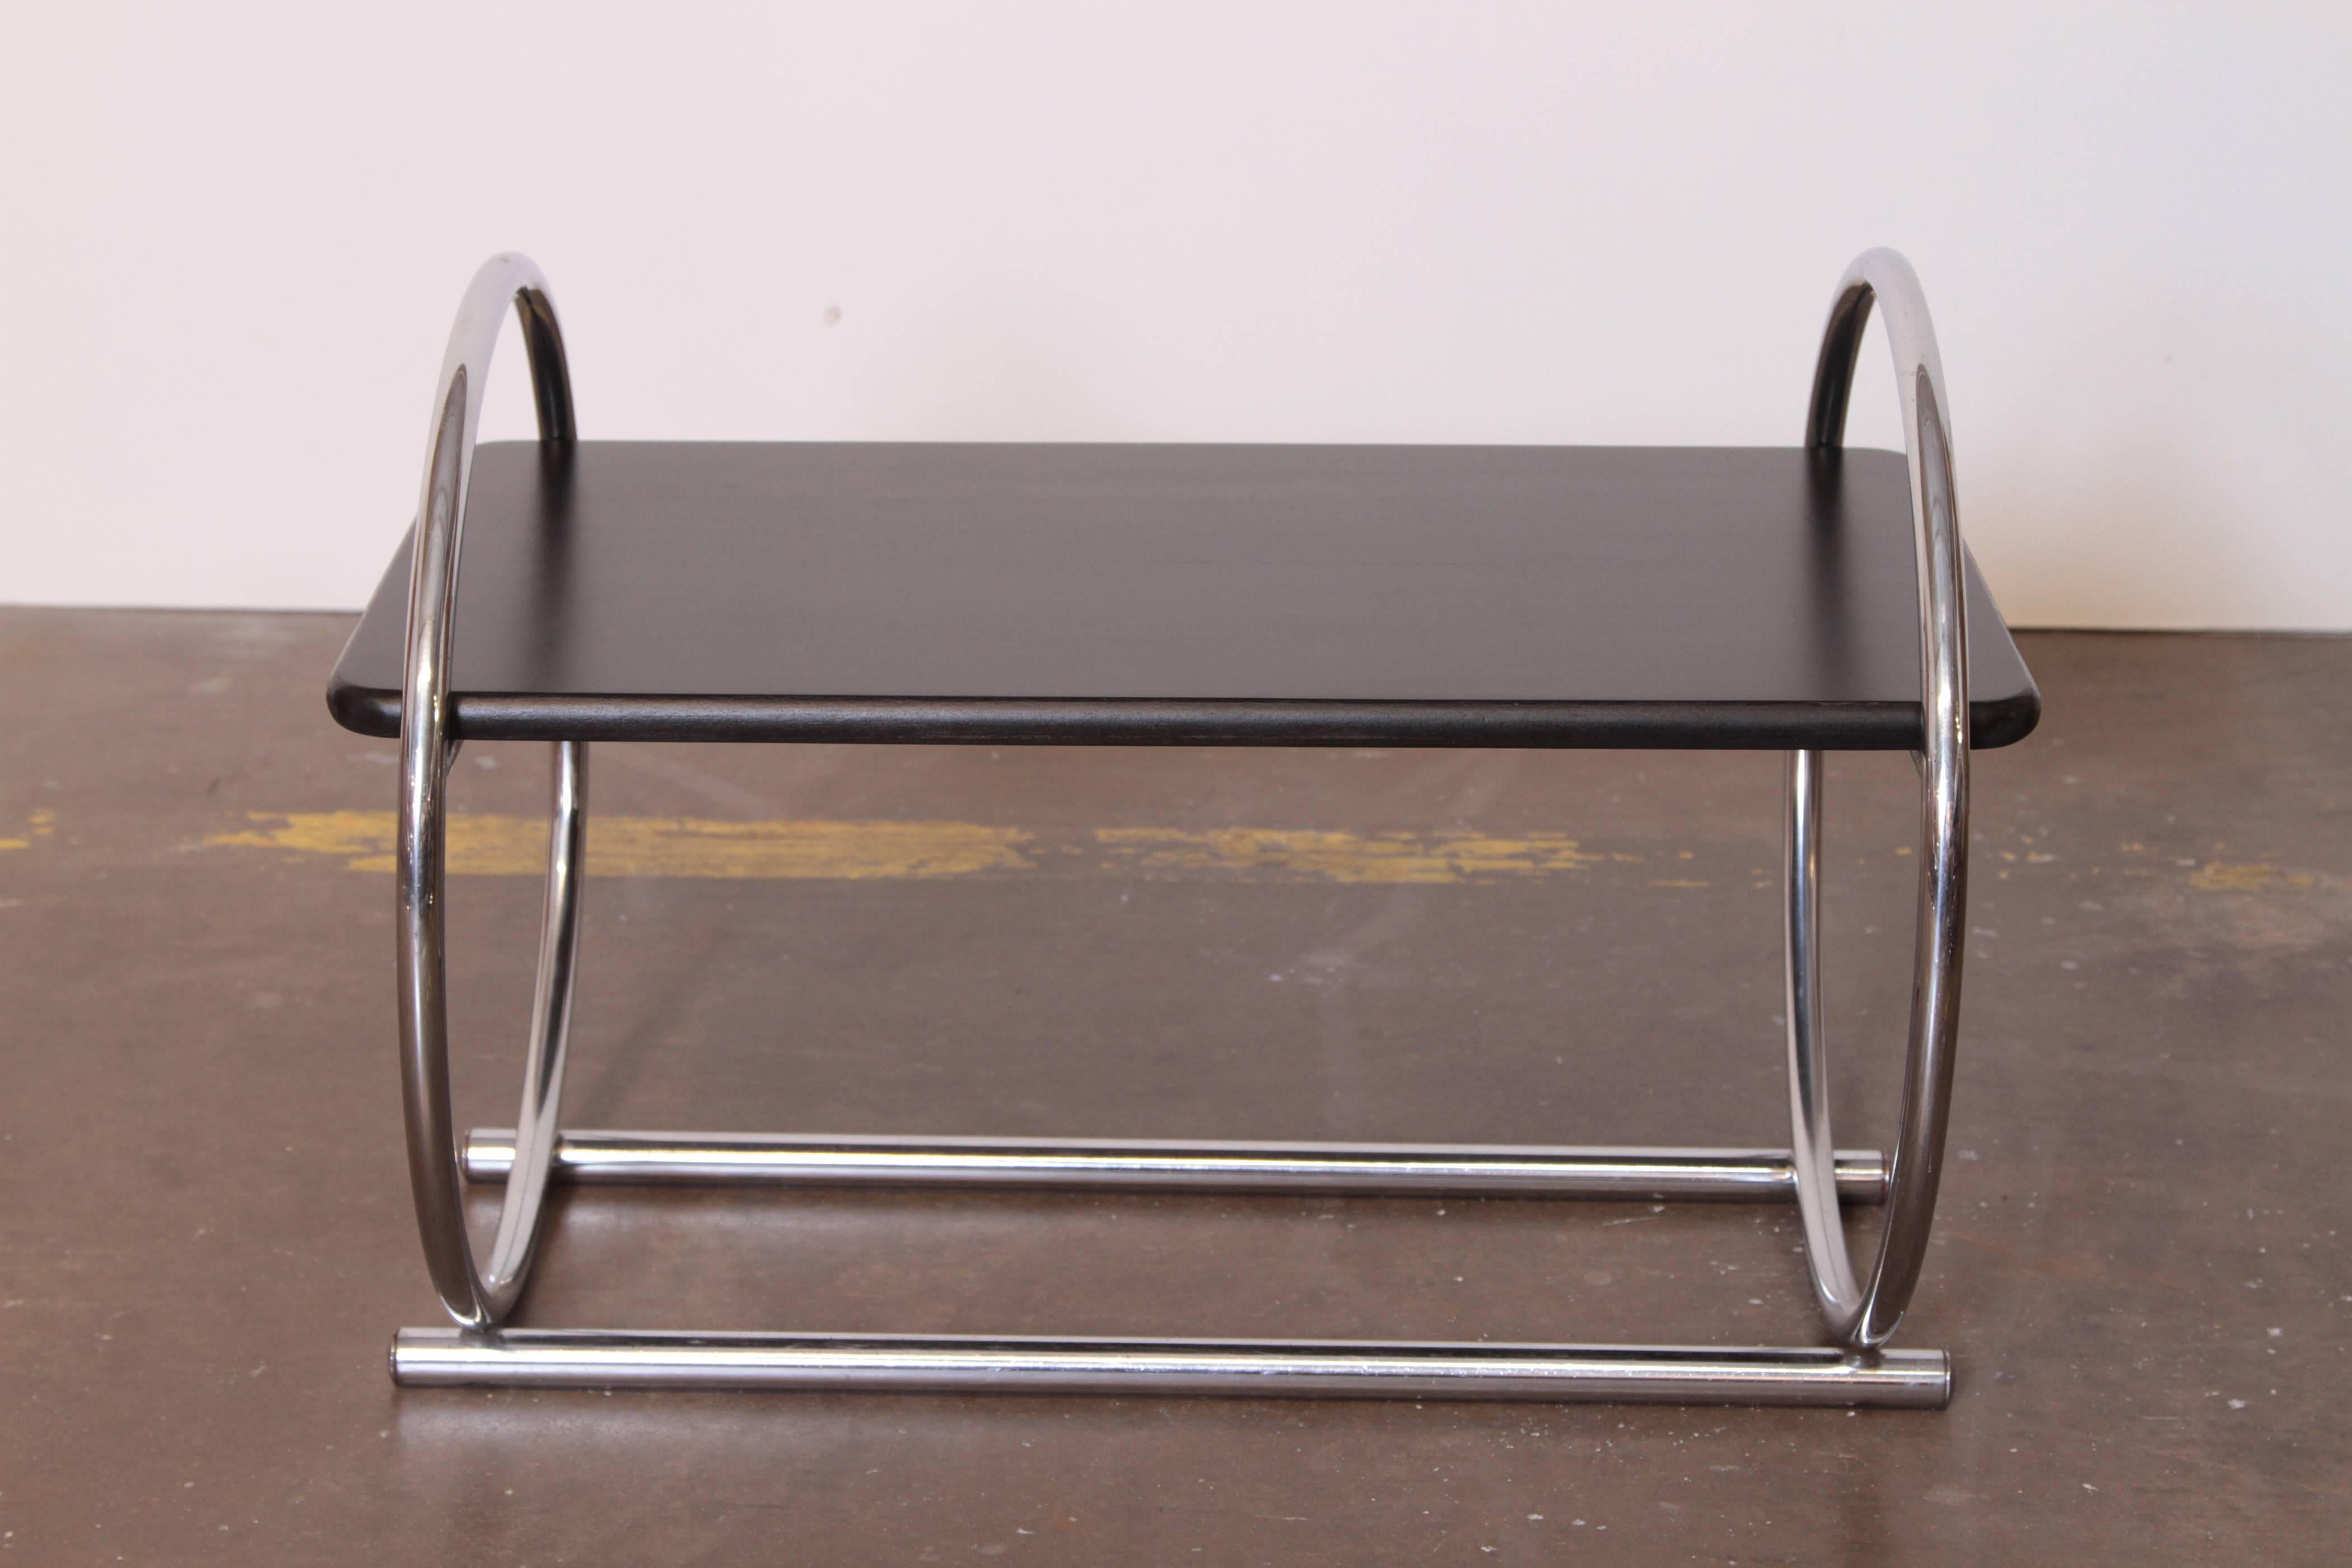 Art Deco Machine Age Wolfgang Hoffmann for Howell cocktail / coffee / occasional table

Iconic and rare hoop - end coffee table by Hoffmann Hoffman for Howell Chromsteel Chrome Steel
Minty restored version.
Howell modern chrome steel furniture